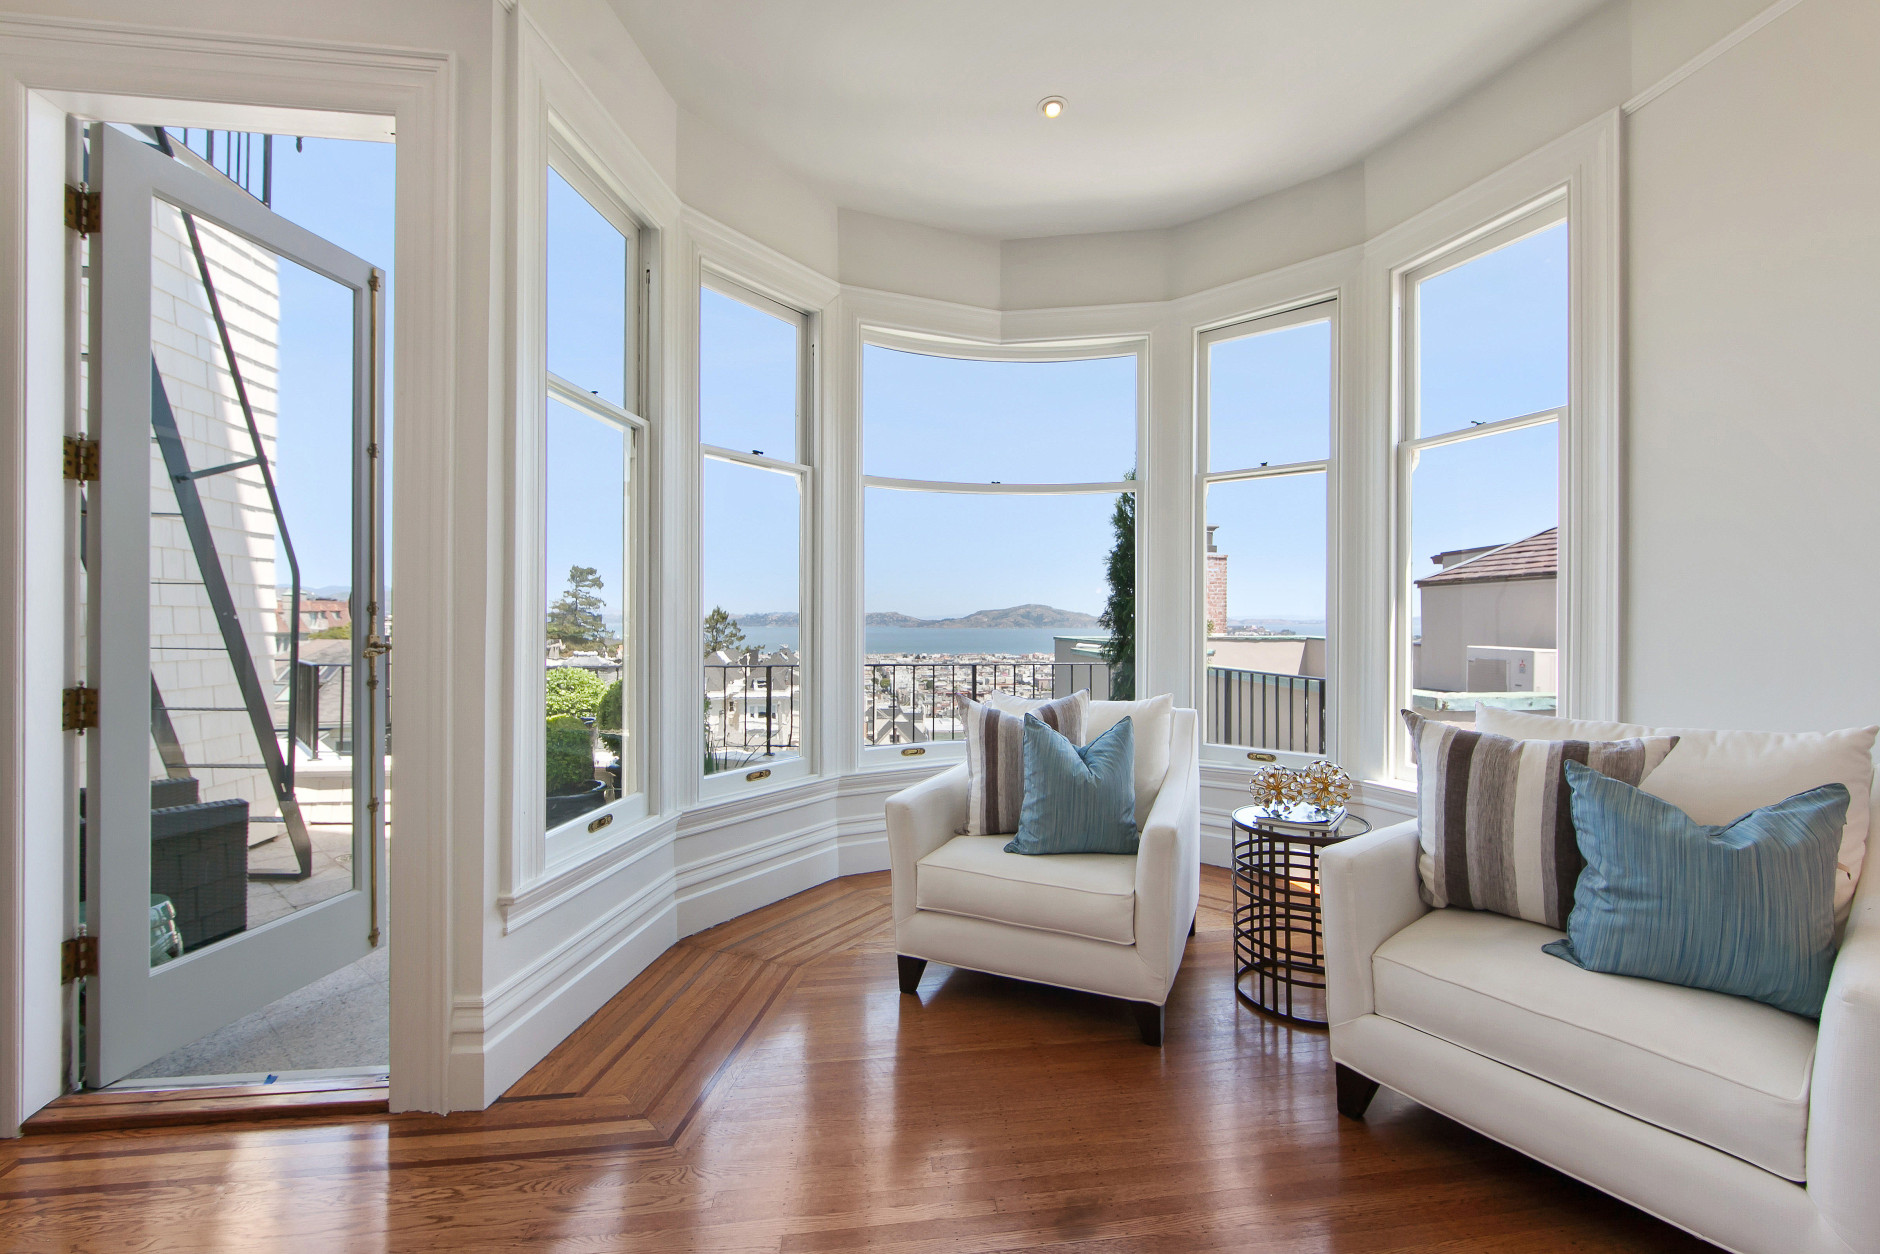 Meg Ryan’s San Francisco six-bedroom home that she shared with actor Dennis Quaid is up for sale and priced at nearly $9 million. (Jason Wakefield/TopTenRealEstate)